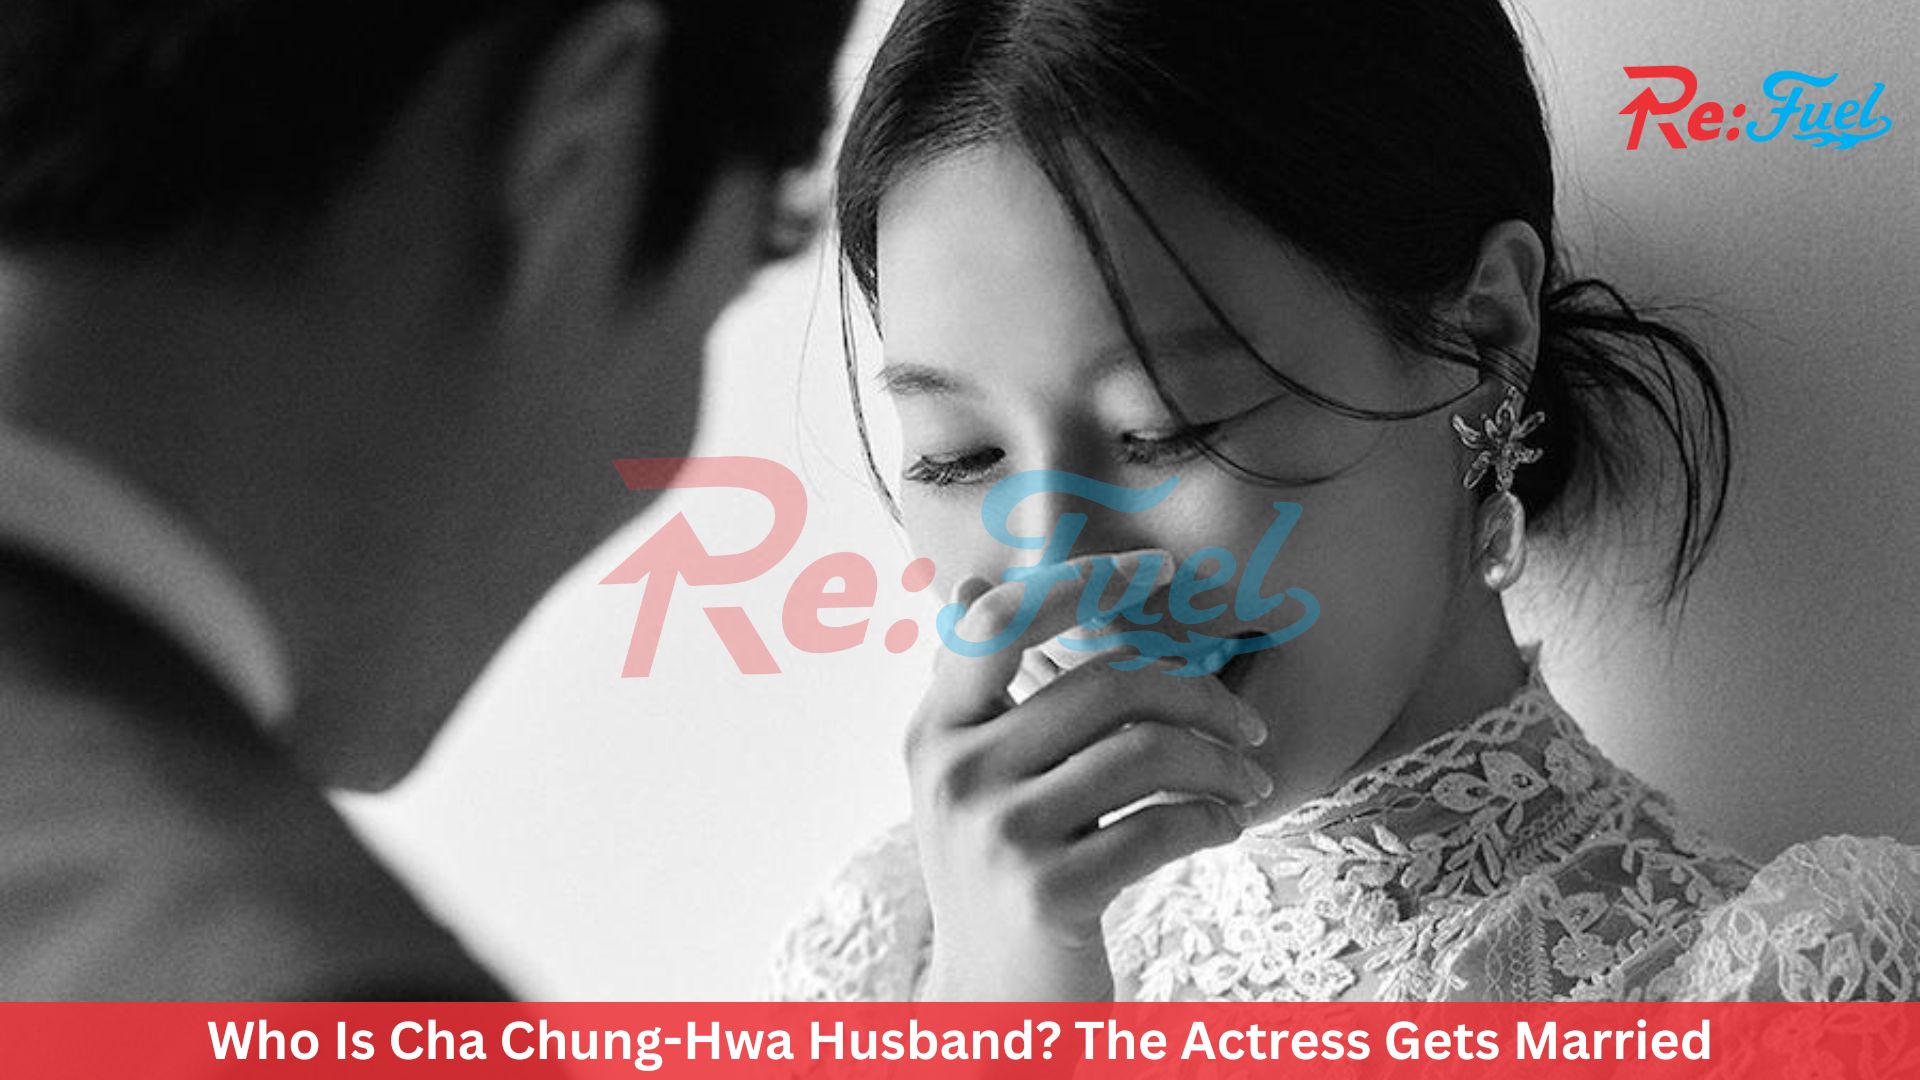 Who Is Cha Chung-Hwa Husband? The Actress Gets Married